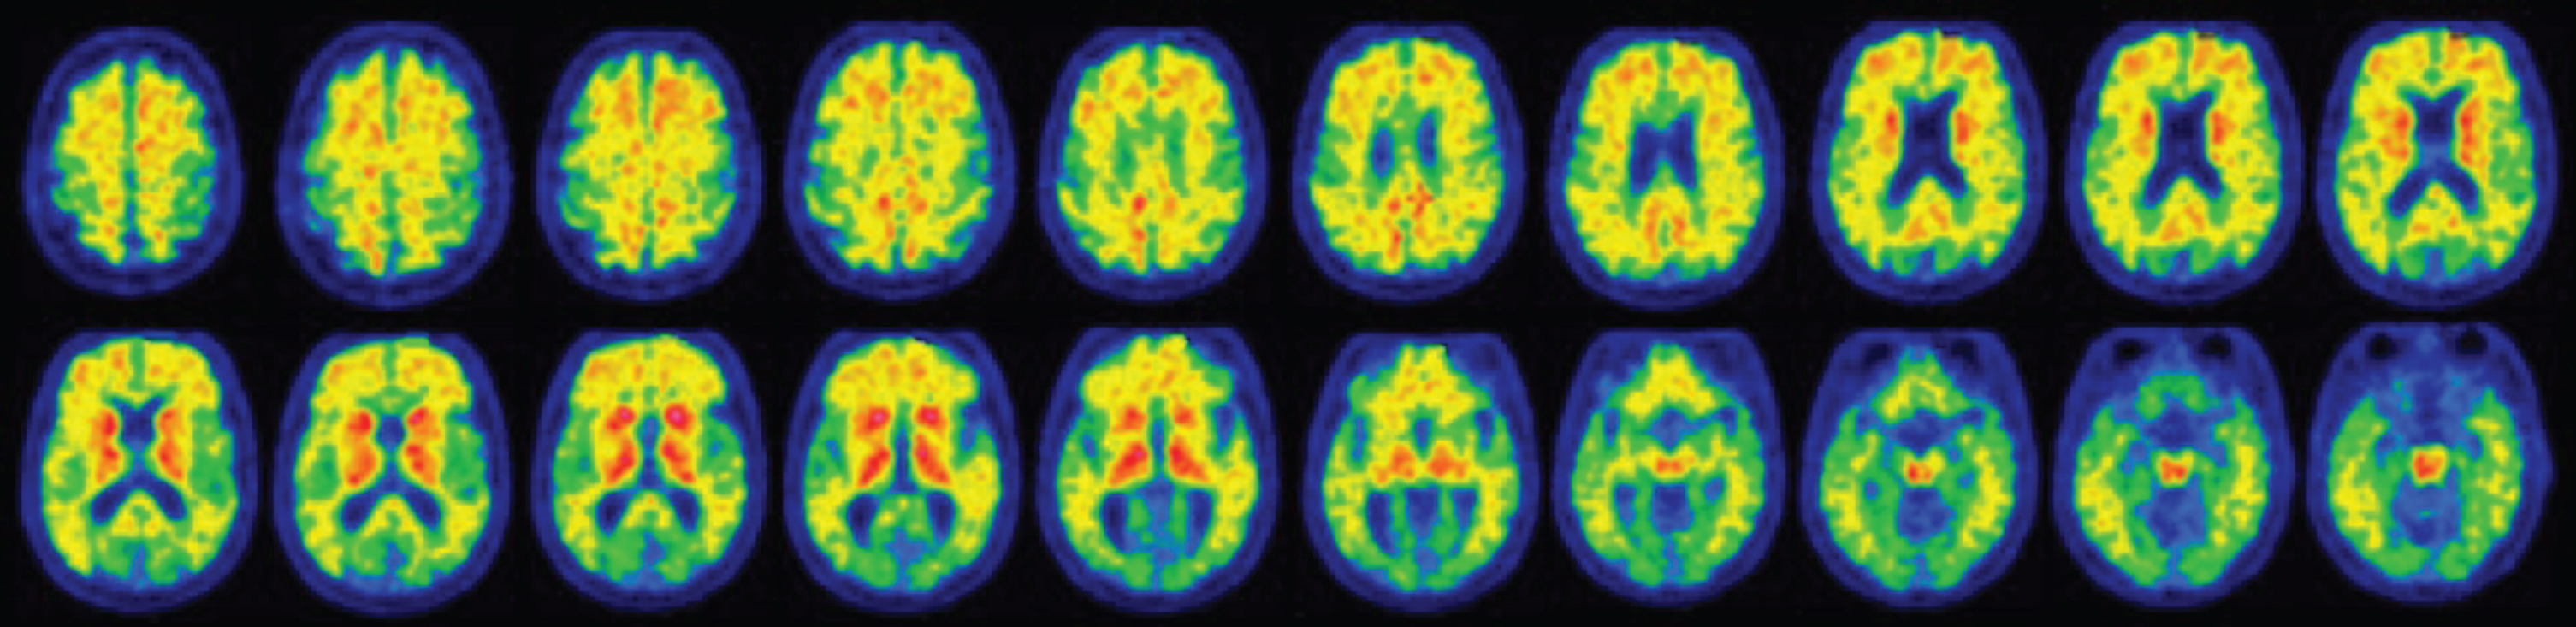 18F-Flutemetamol PET scan highlighting a diffused uptake of the amyloid tracer at the level of the cerebral cortex, particularly in the frontal lobes, parietal lobes, lateral temporal lobes, in the posterior cingulate, bilaterally and in correspondence of the striate nuclei.